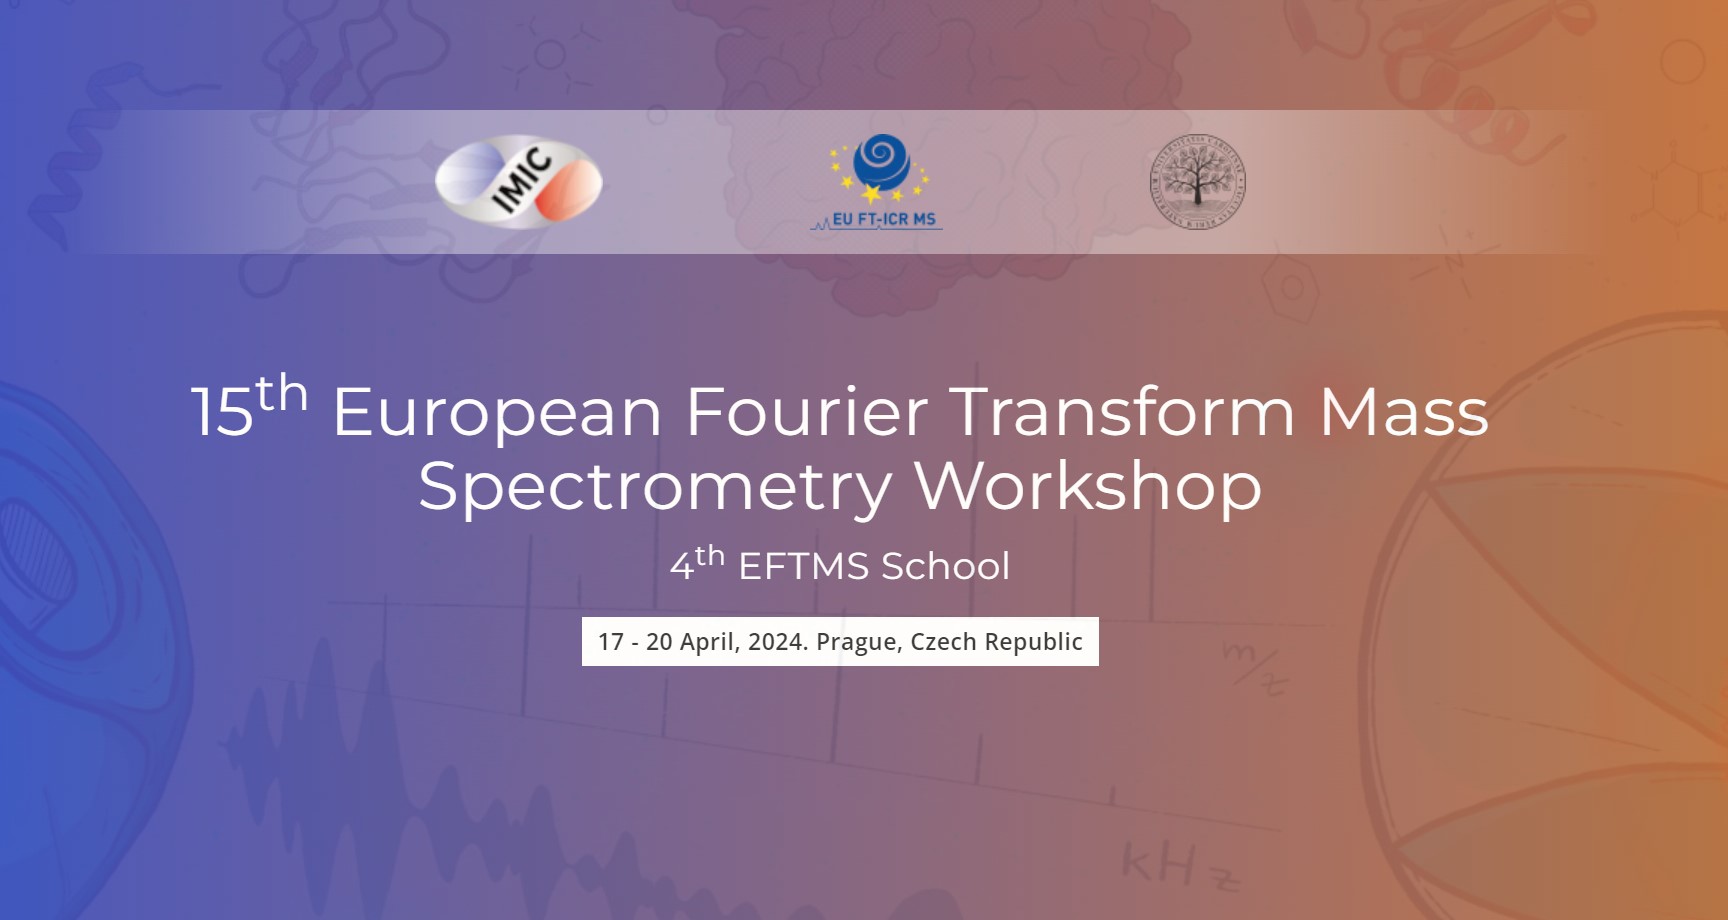 15th European Fourier Transform Mass Spectrometry Workshop and 4th EFTMS School